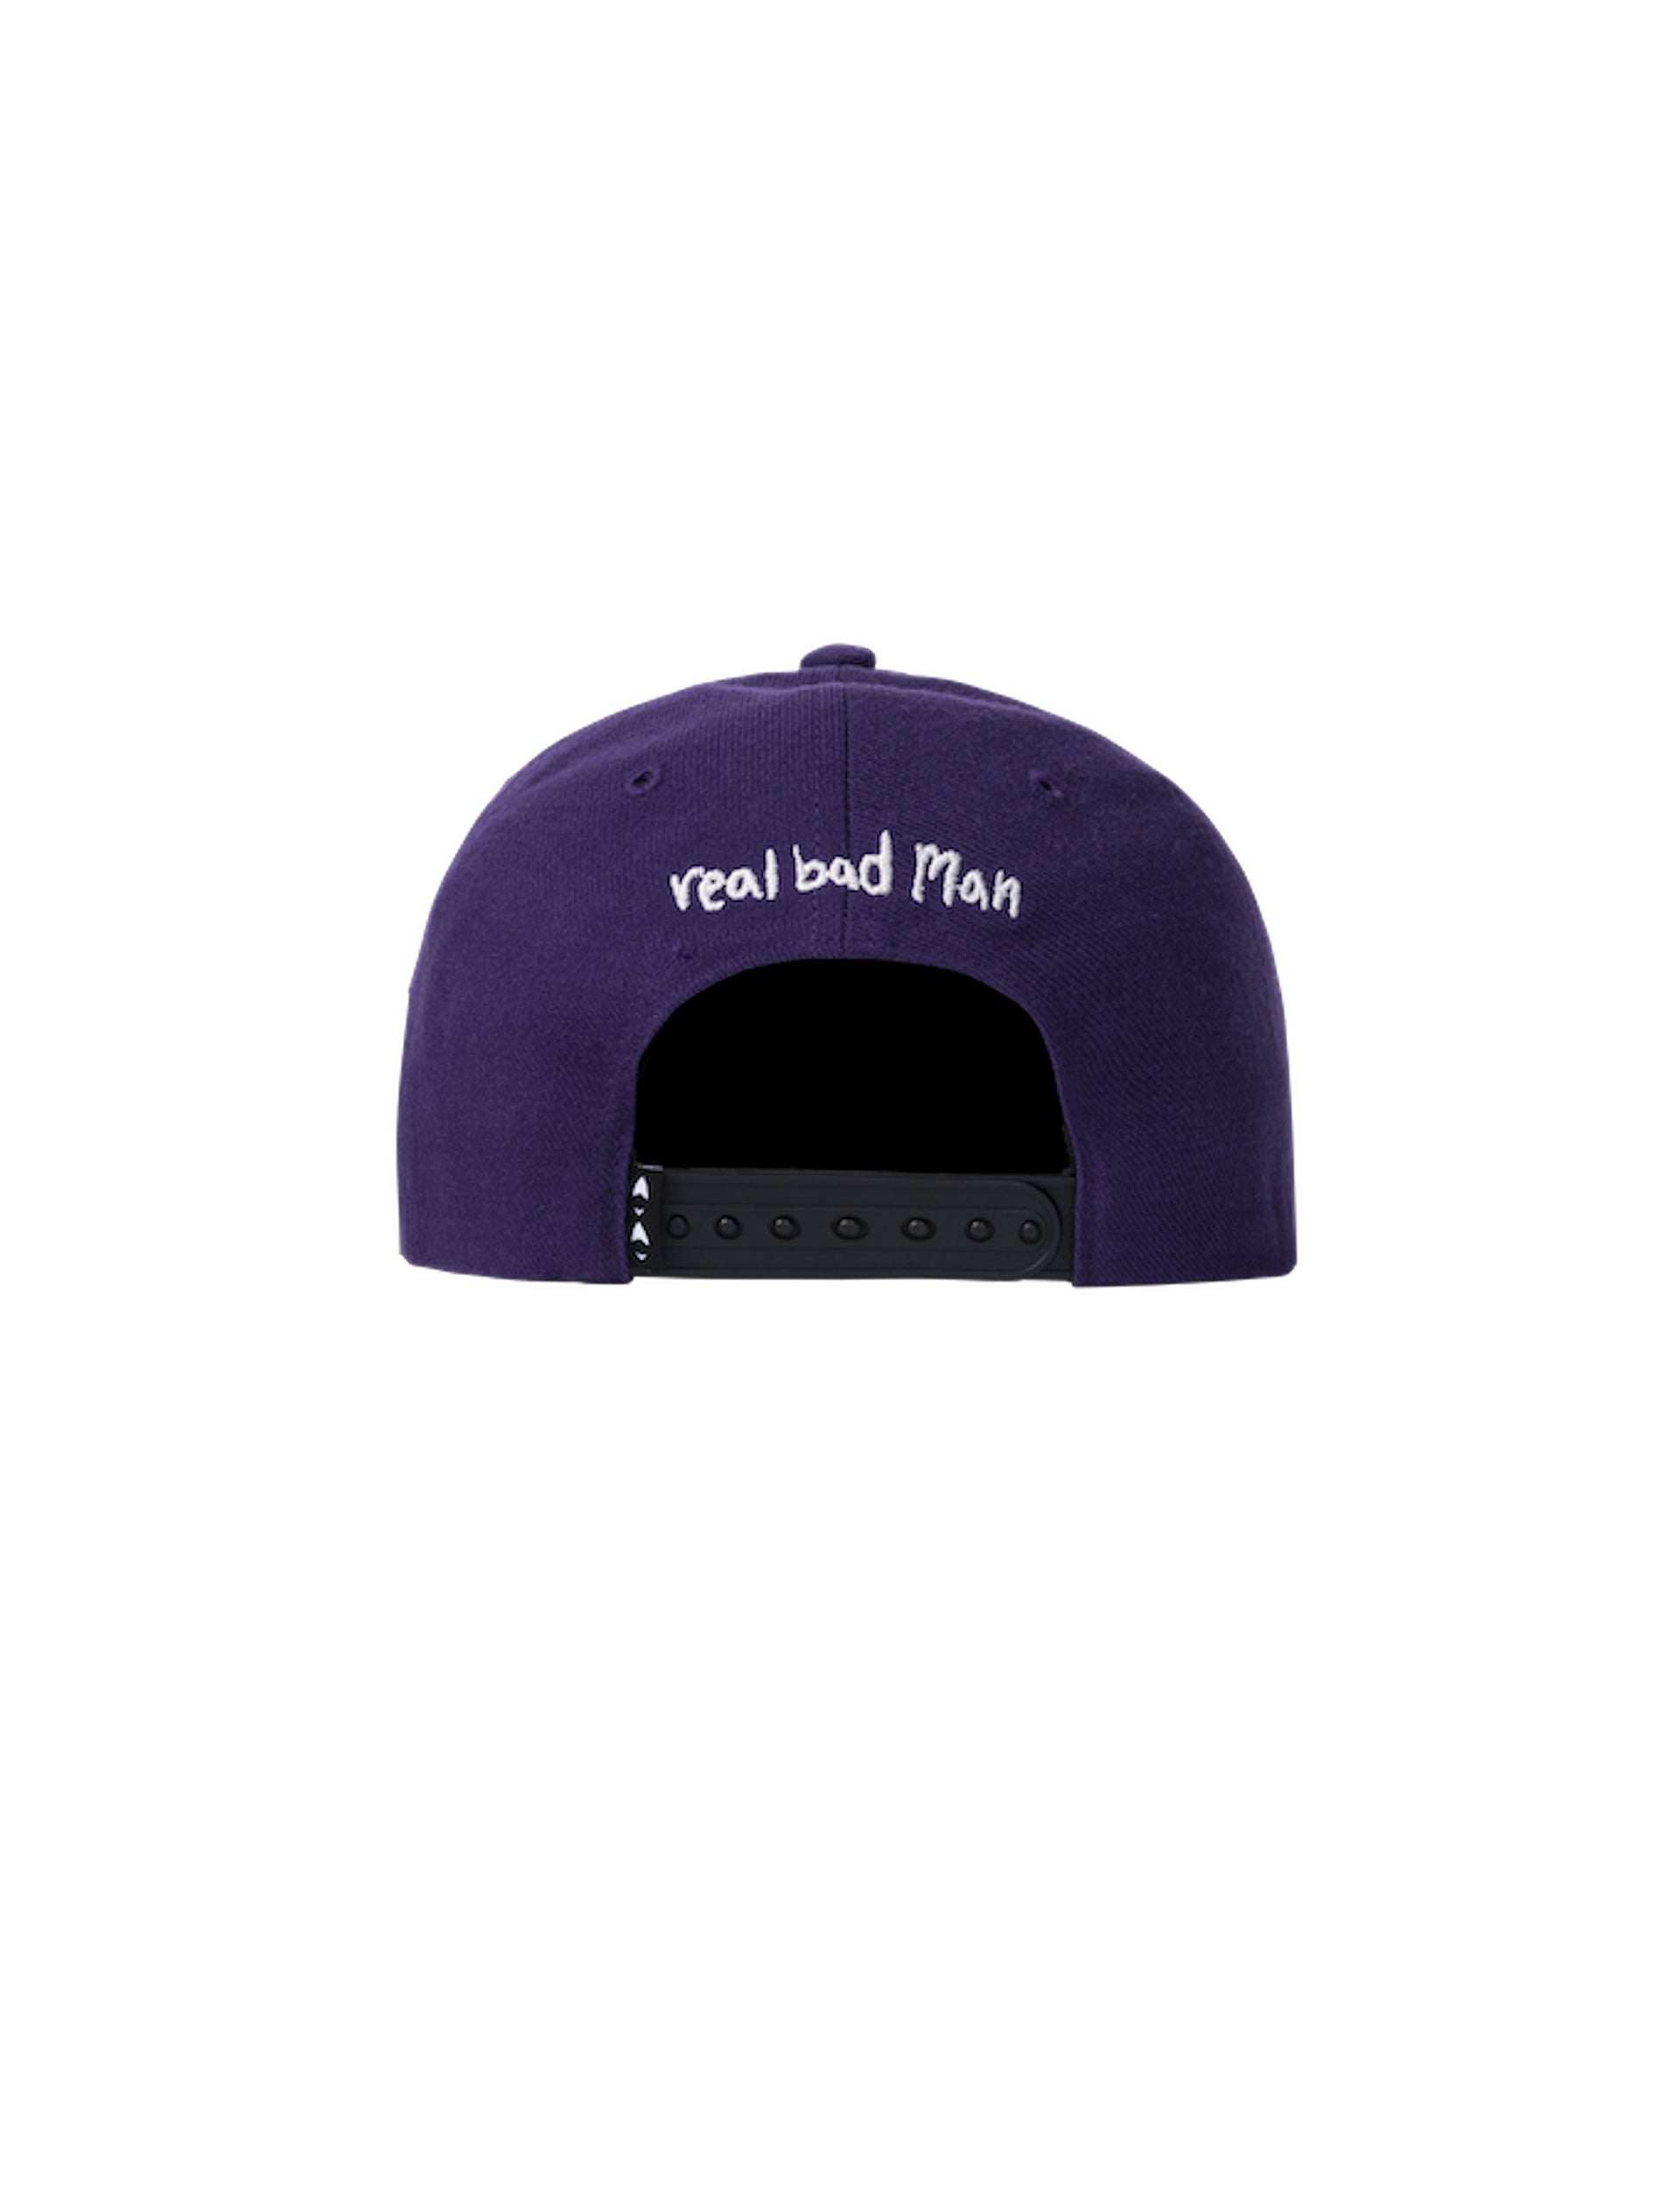 REAL BAD MAN SO FAR OUT 6 PANEL PURPLE